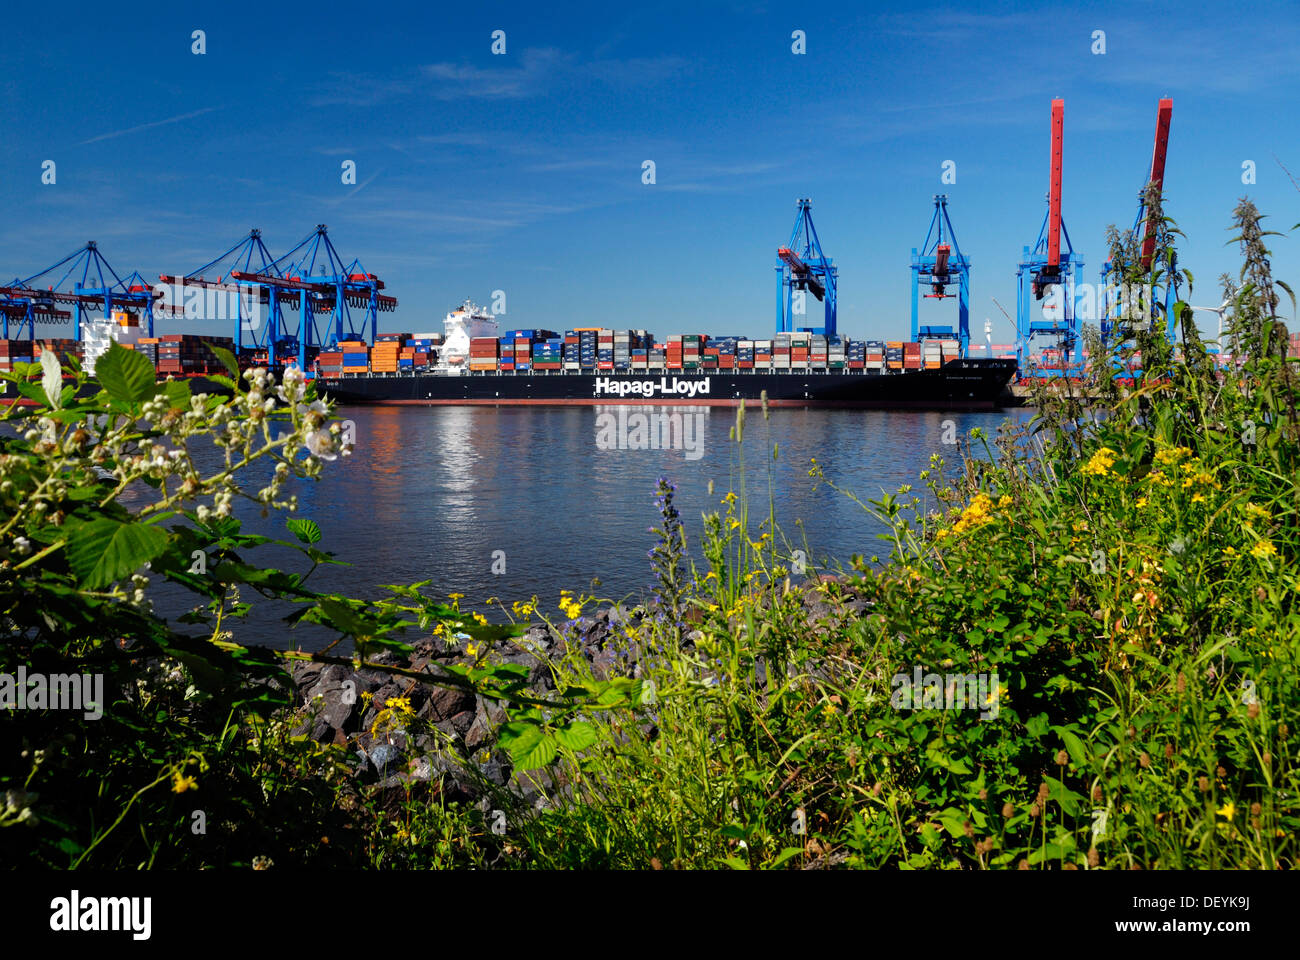 Hapag-Lloyd container ship at the Altenwerder container terminal, Hamburg Stock Photo